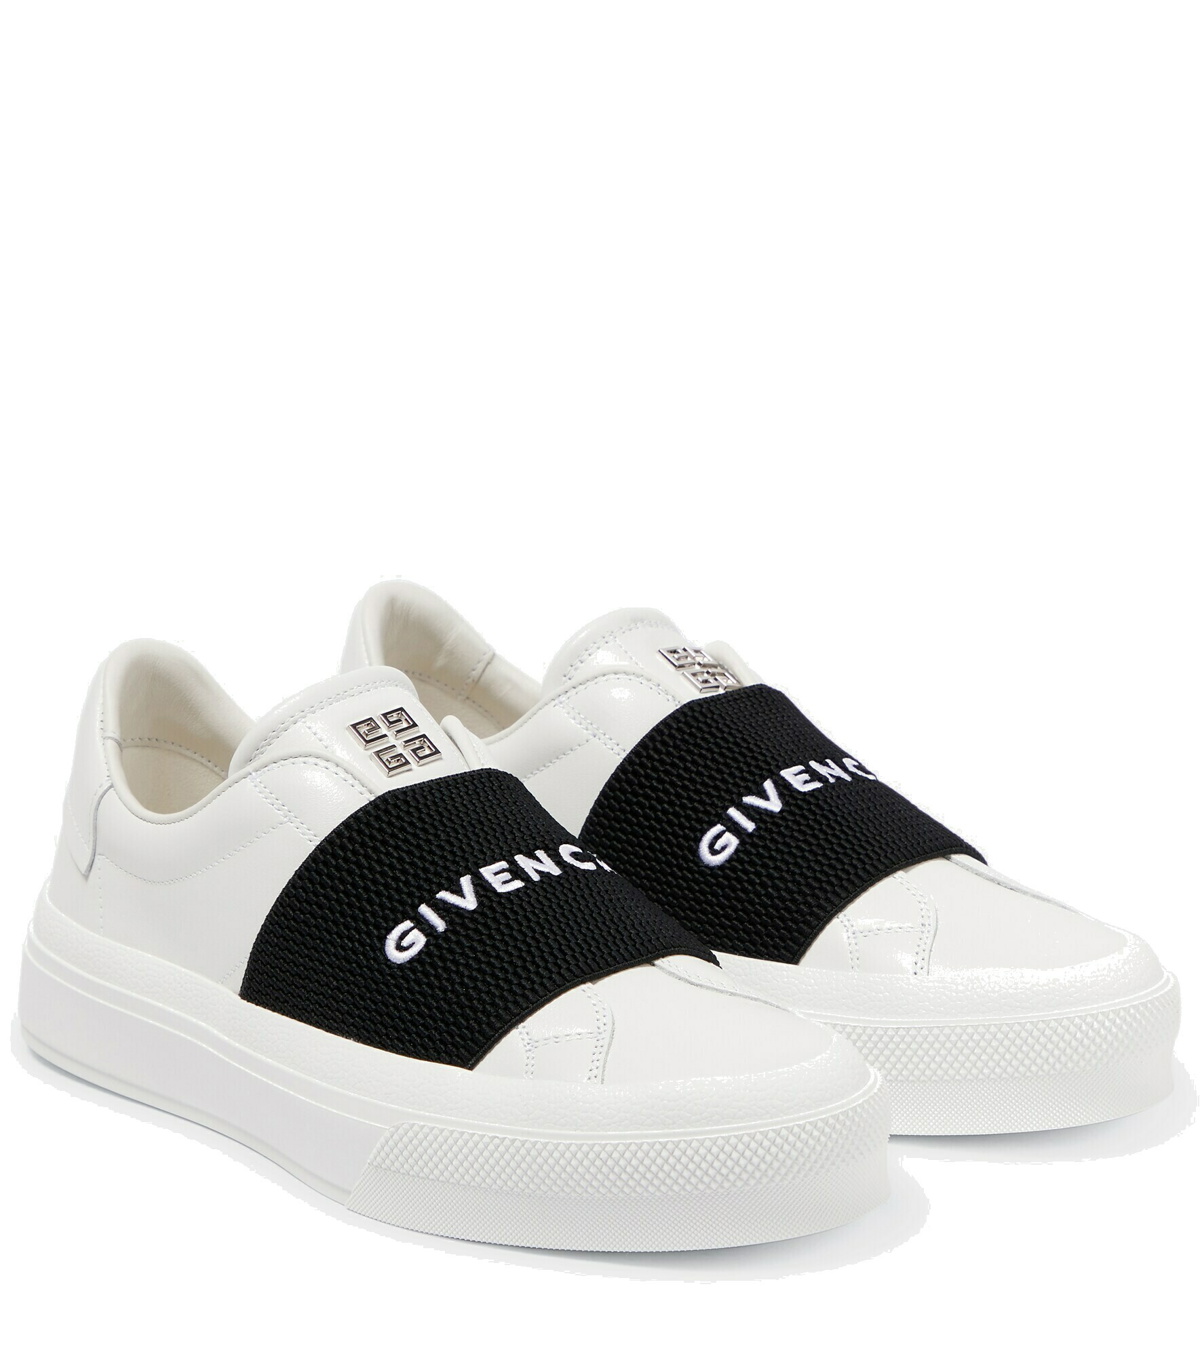 Givenchy - City Sport leather sneakers Givenchy